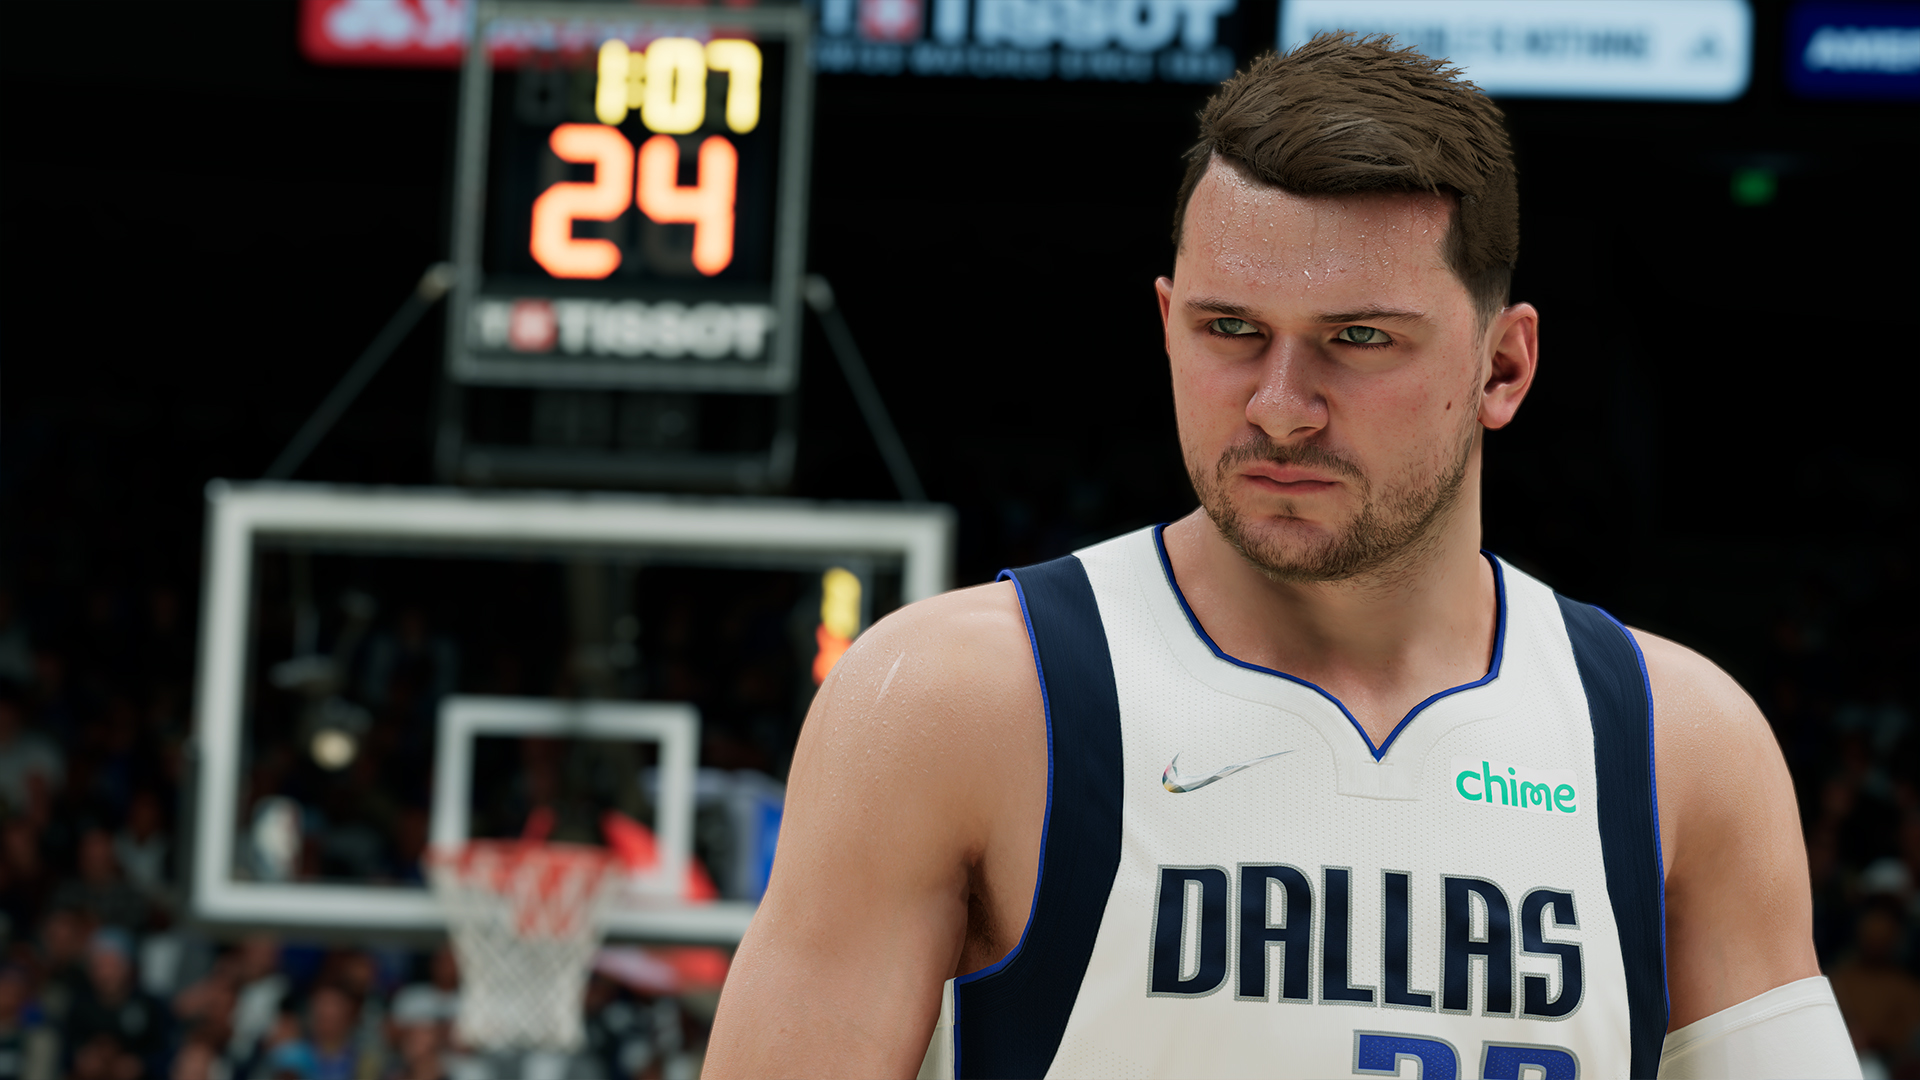 NBA 2K22 release date, trailer, cover, ratings and everything you need to know